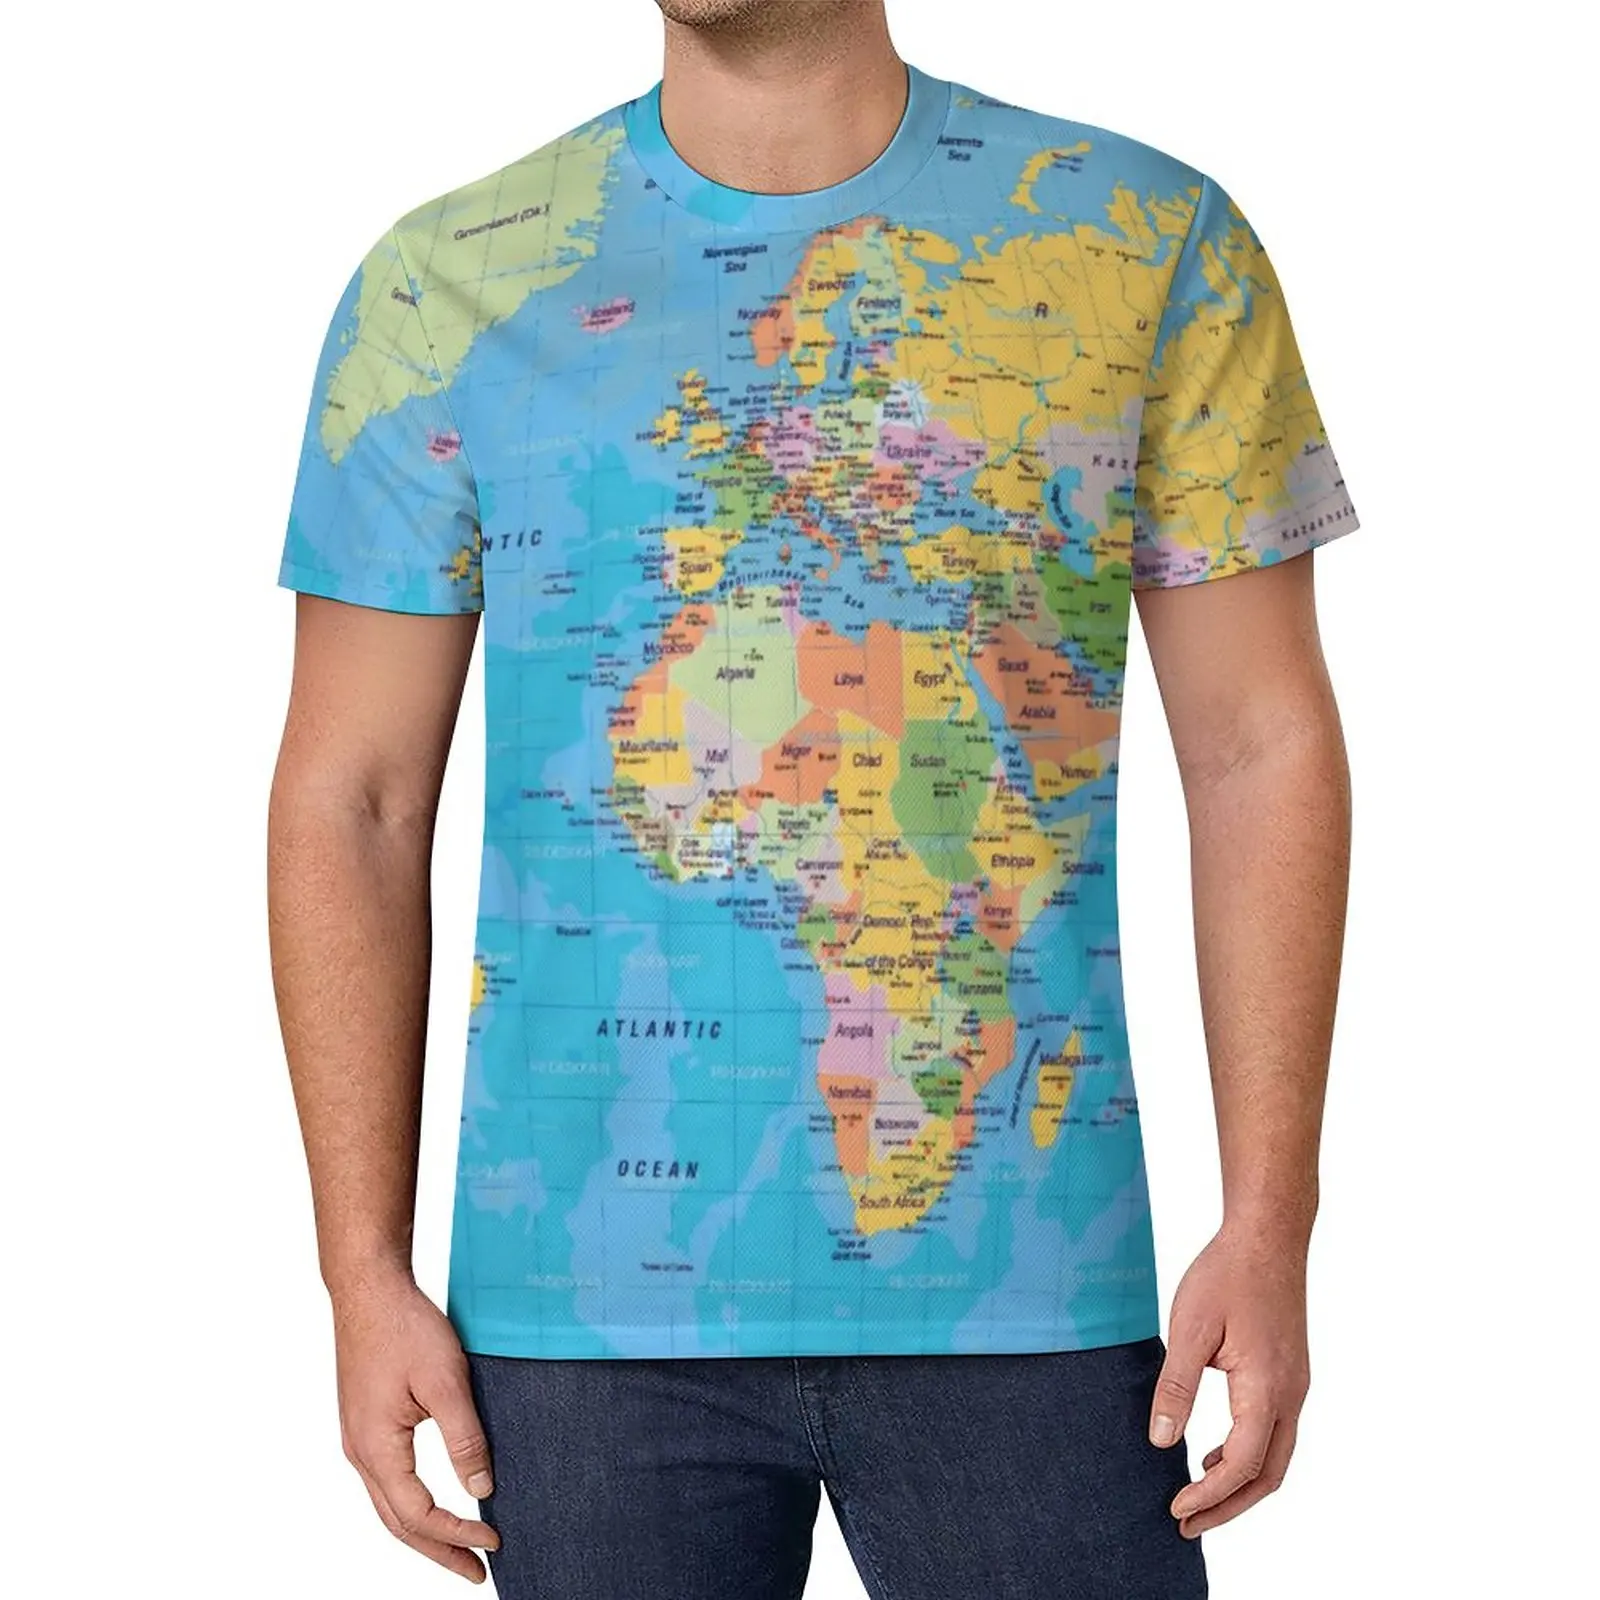 

Earth Map T-Shirt Couple World Maps Print Awesome T Shirts Summer Hippie Tees Pattern Oversized Clothing